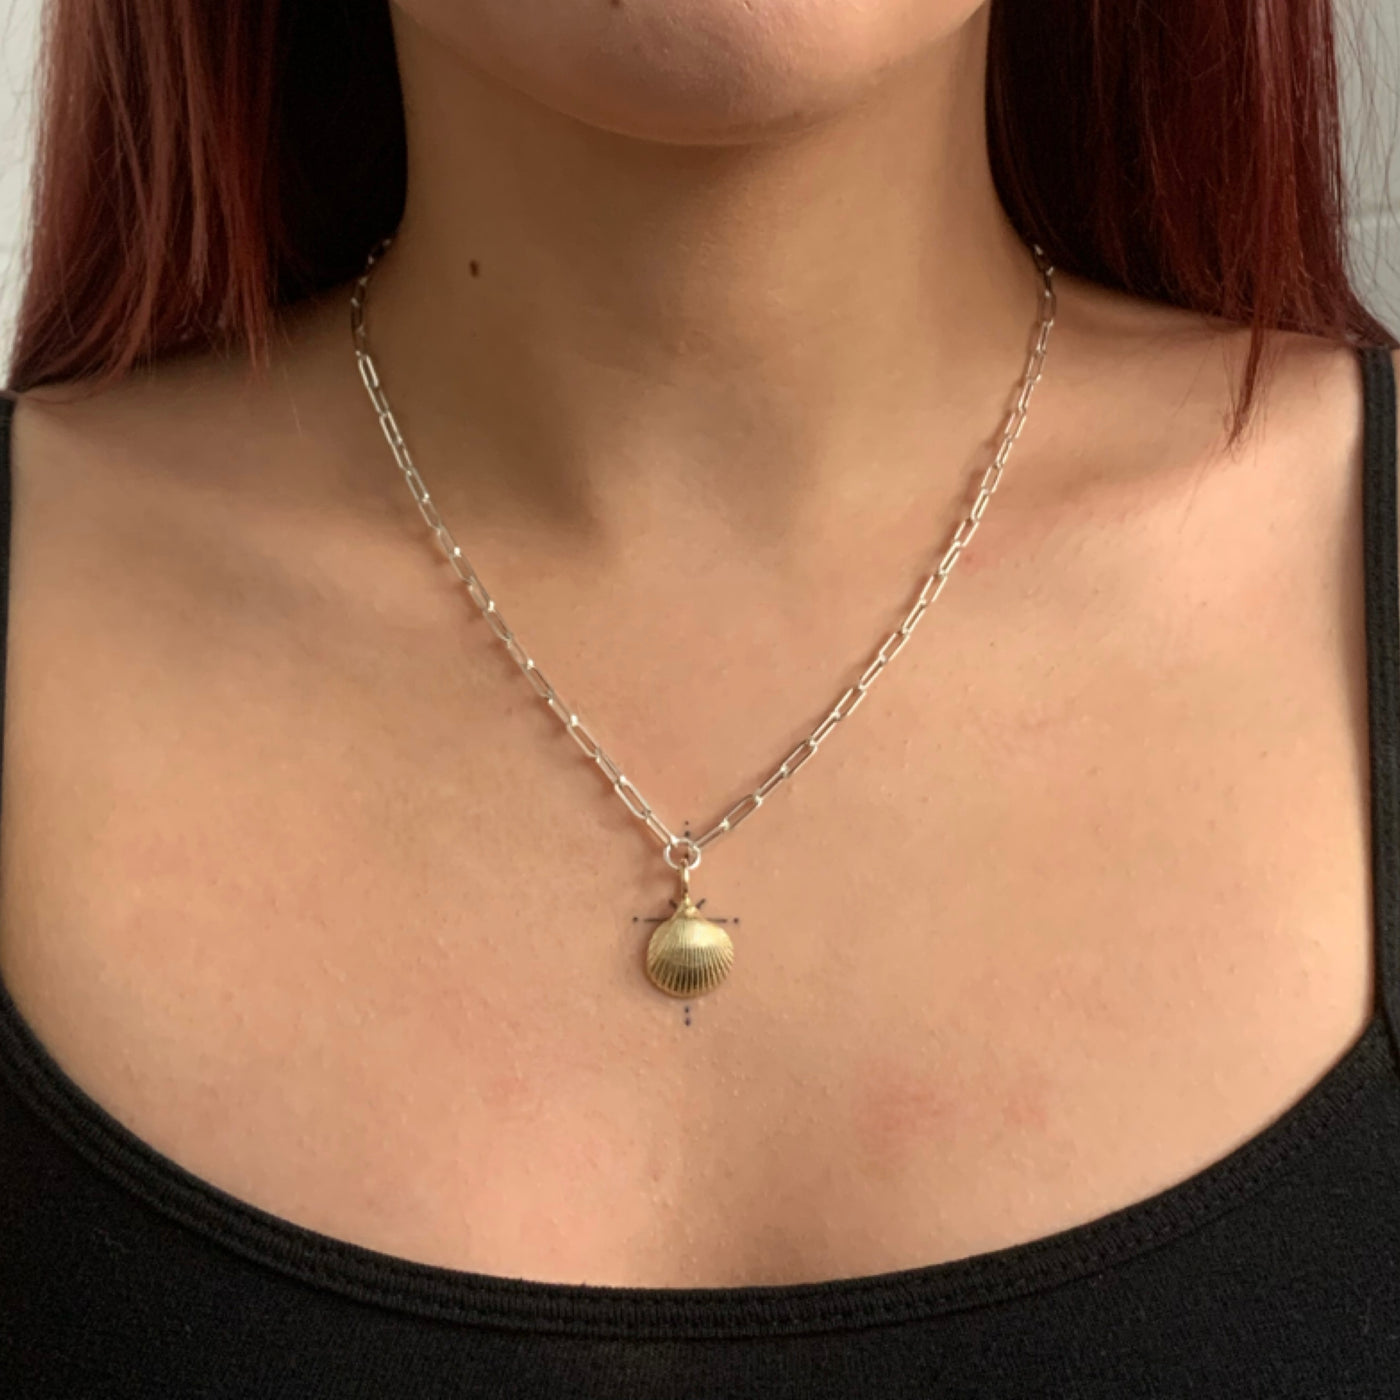 Handmade 9ct yellow gold mini clam shell charm on a recycled silver trace chain necklace from SilverBoo Jewellery in Lincolnshire